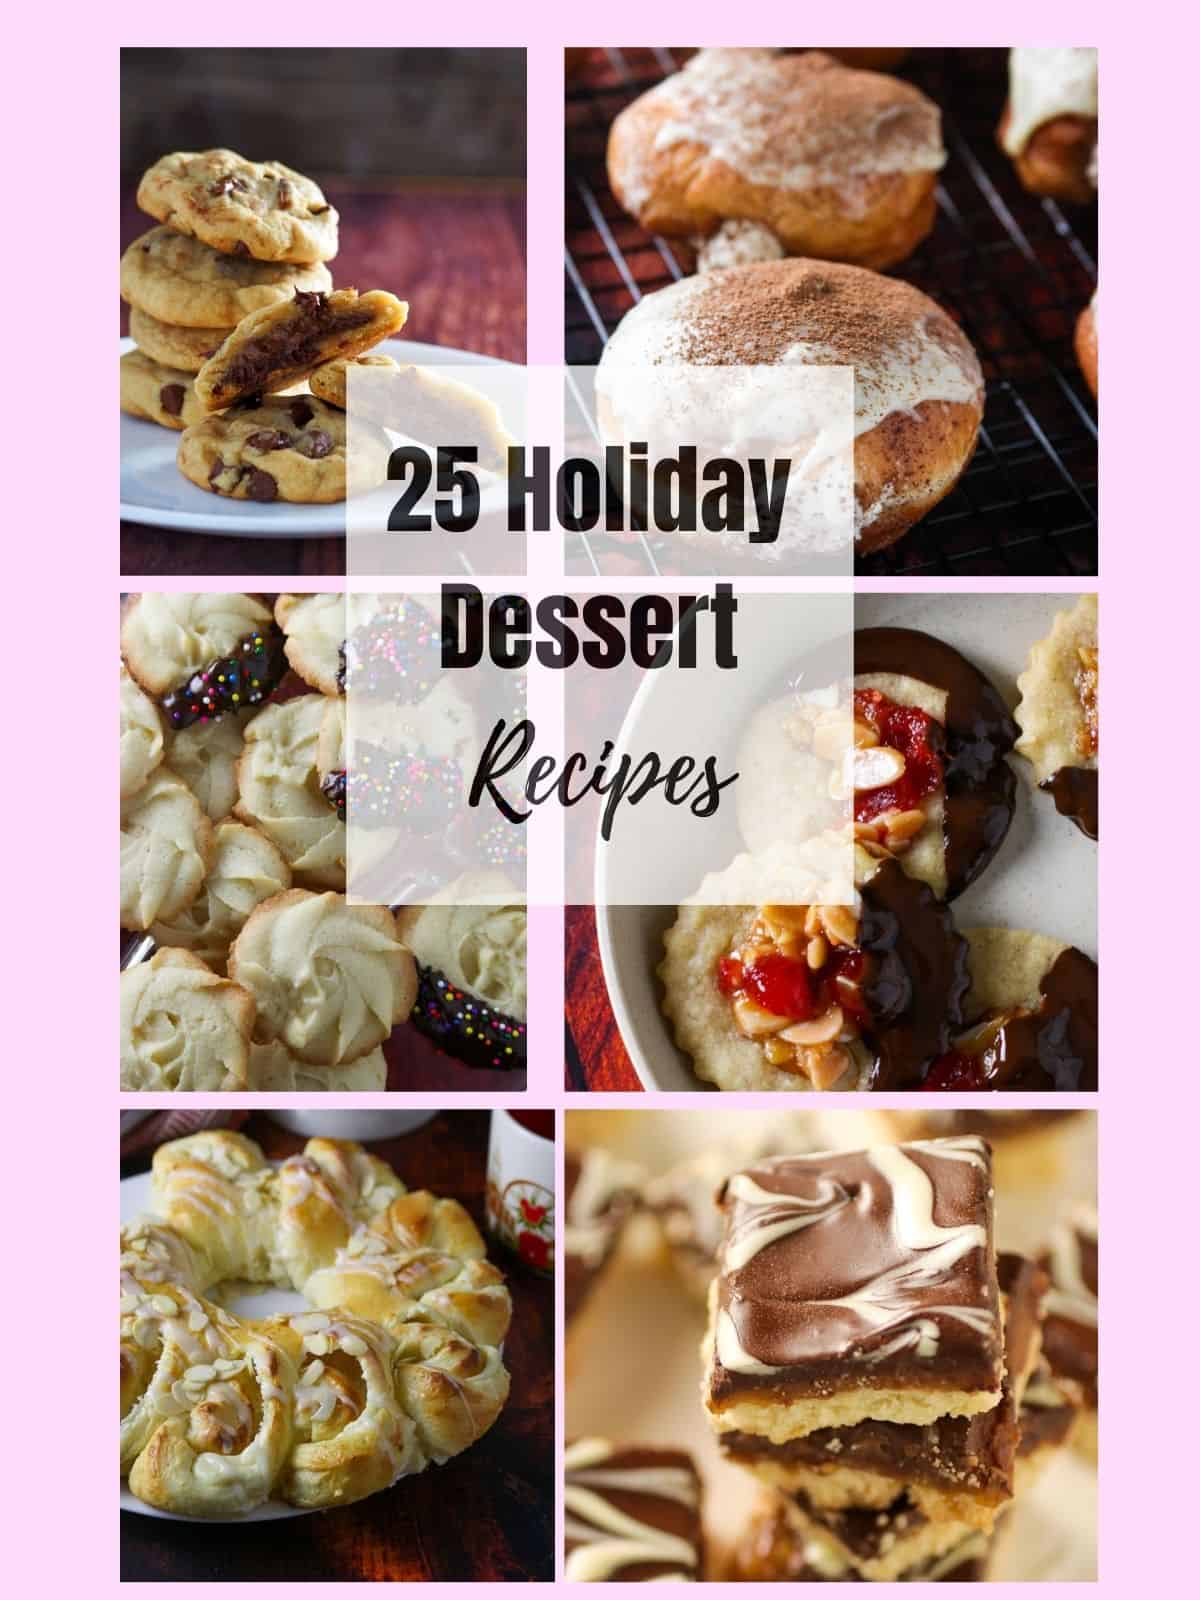 A collage showing 6 baked goods and a text of 25 Holiday Dessert Recipes.